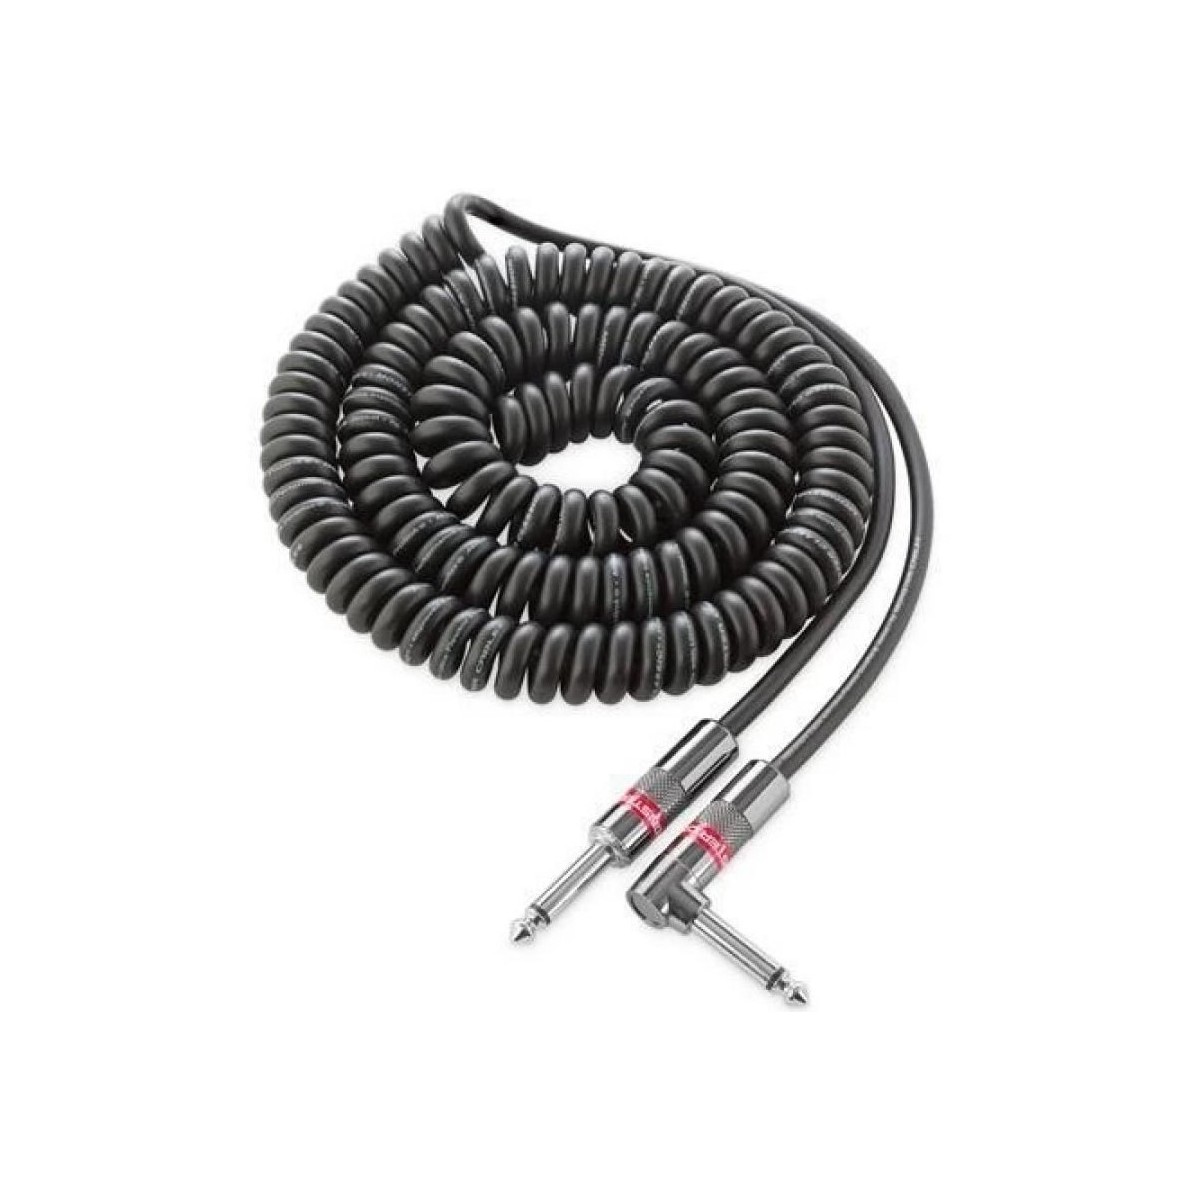 MONSTER CLASSIC CAVO A SPIRALE 6,5 MT A PIPA